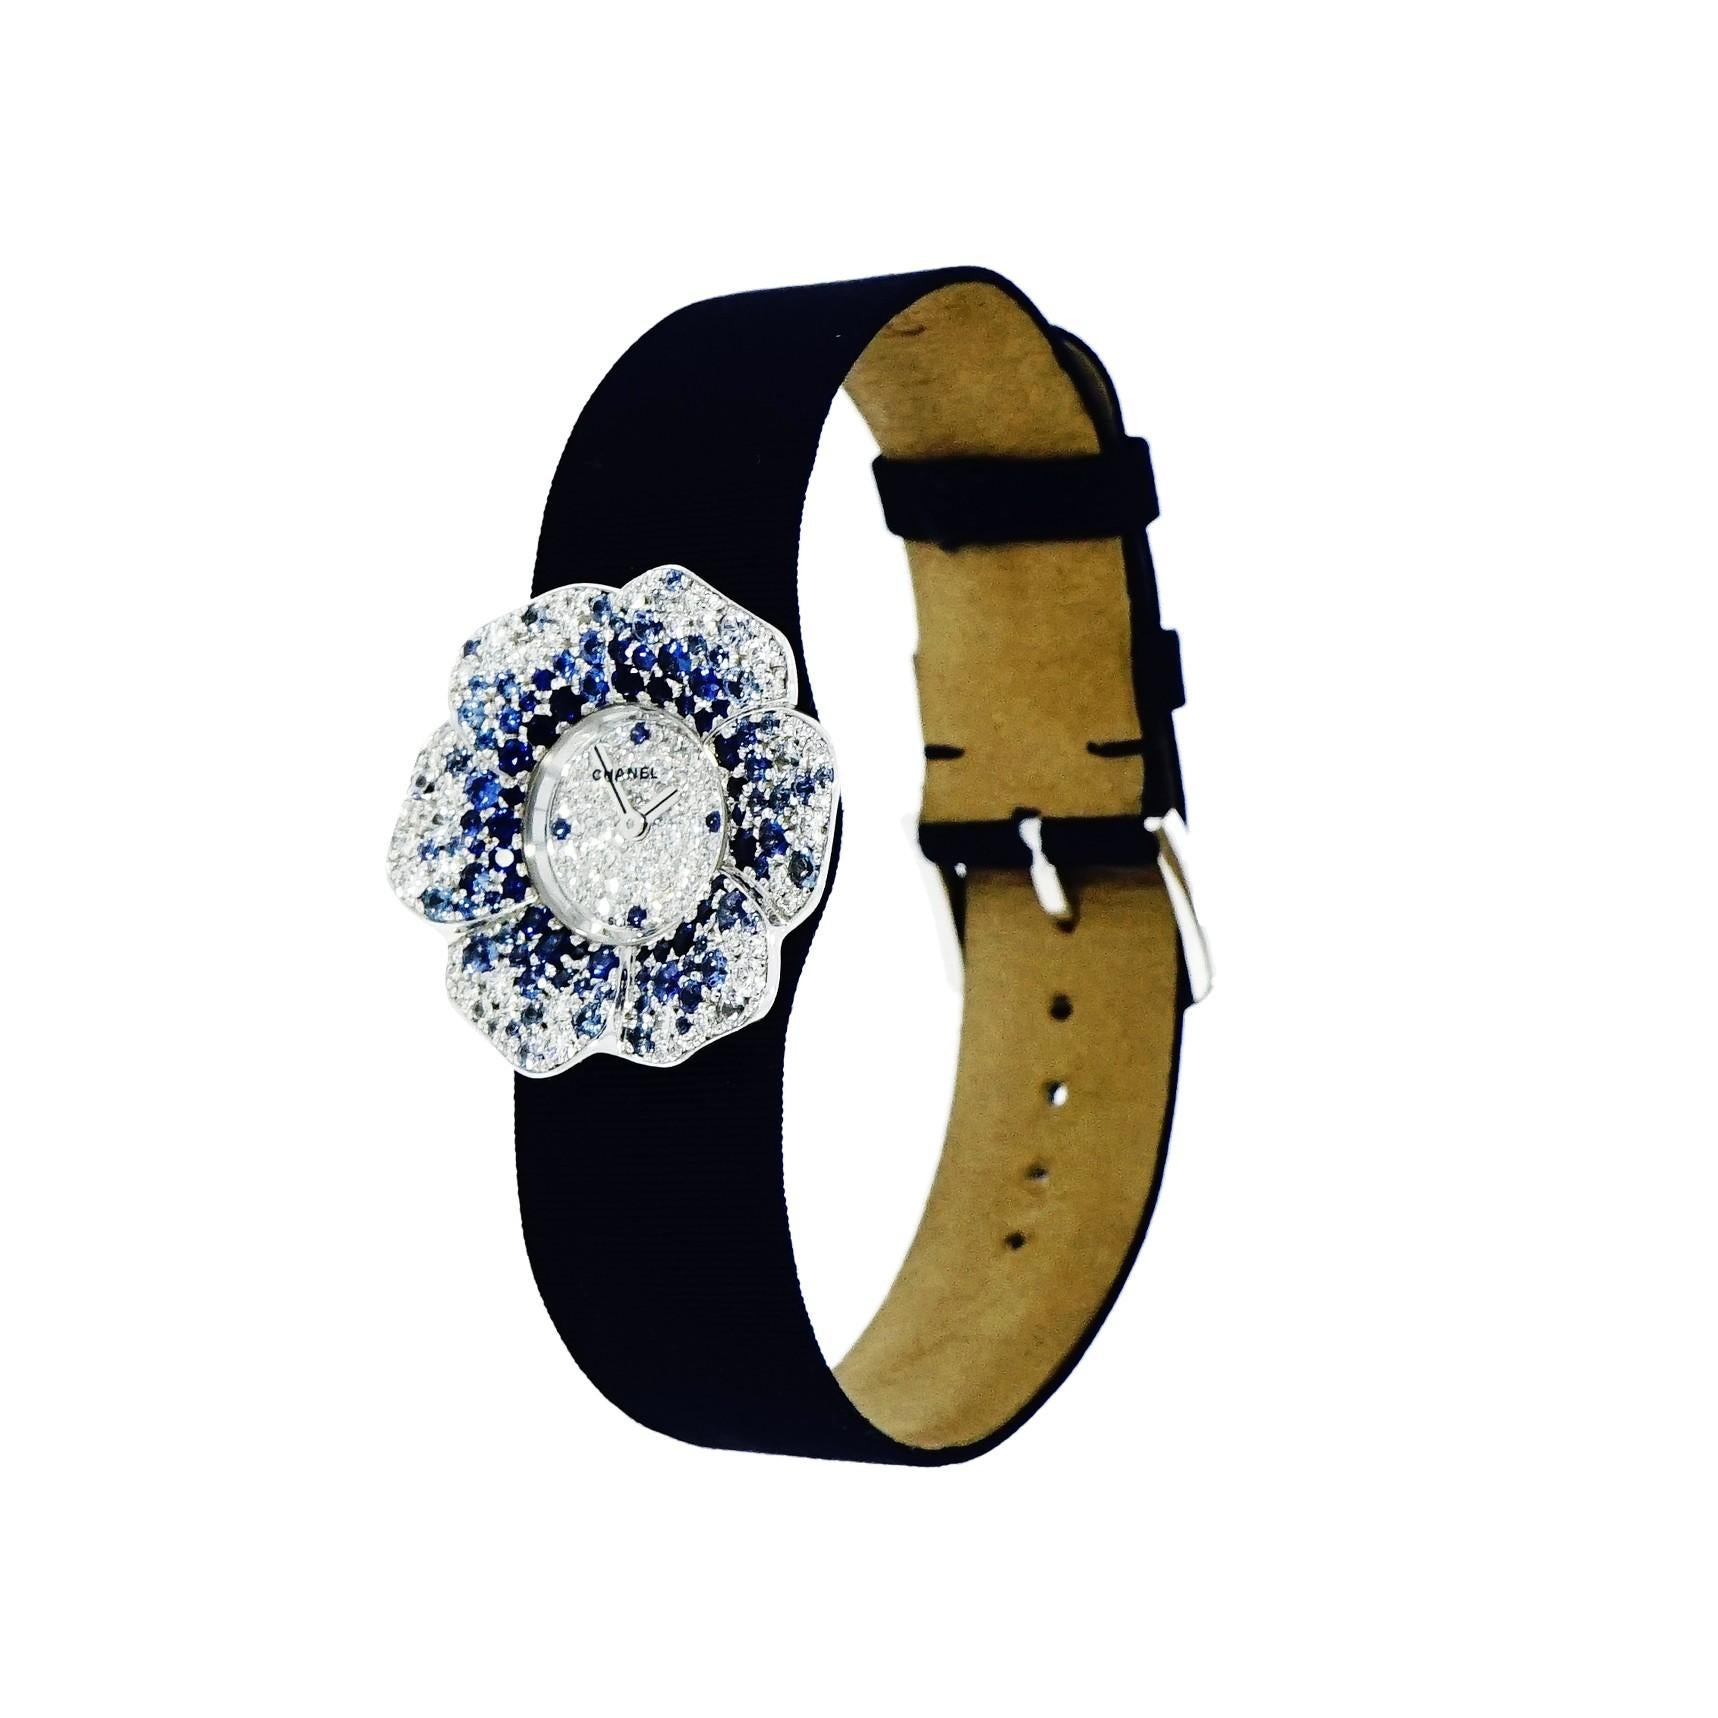 Pre-owned in very good condition Lady’s Chanel Camelia 27mm white gold case set with diamonds and graduated color blue sapphires, quartz movement, pave diamond dial with 12,3,6,9 blue sapphire hour markers, blue satin strap with white gold tang